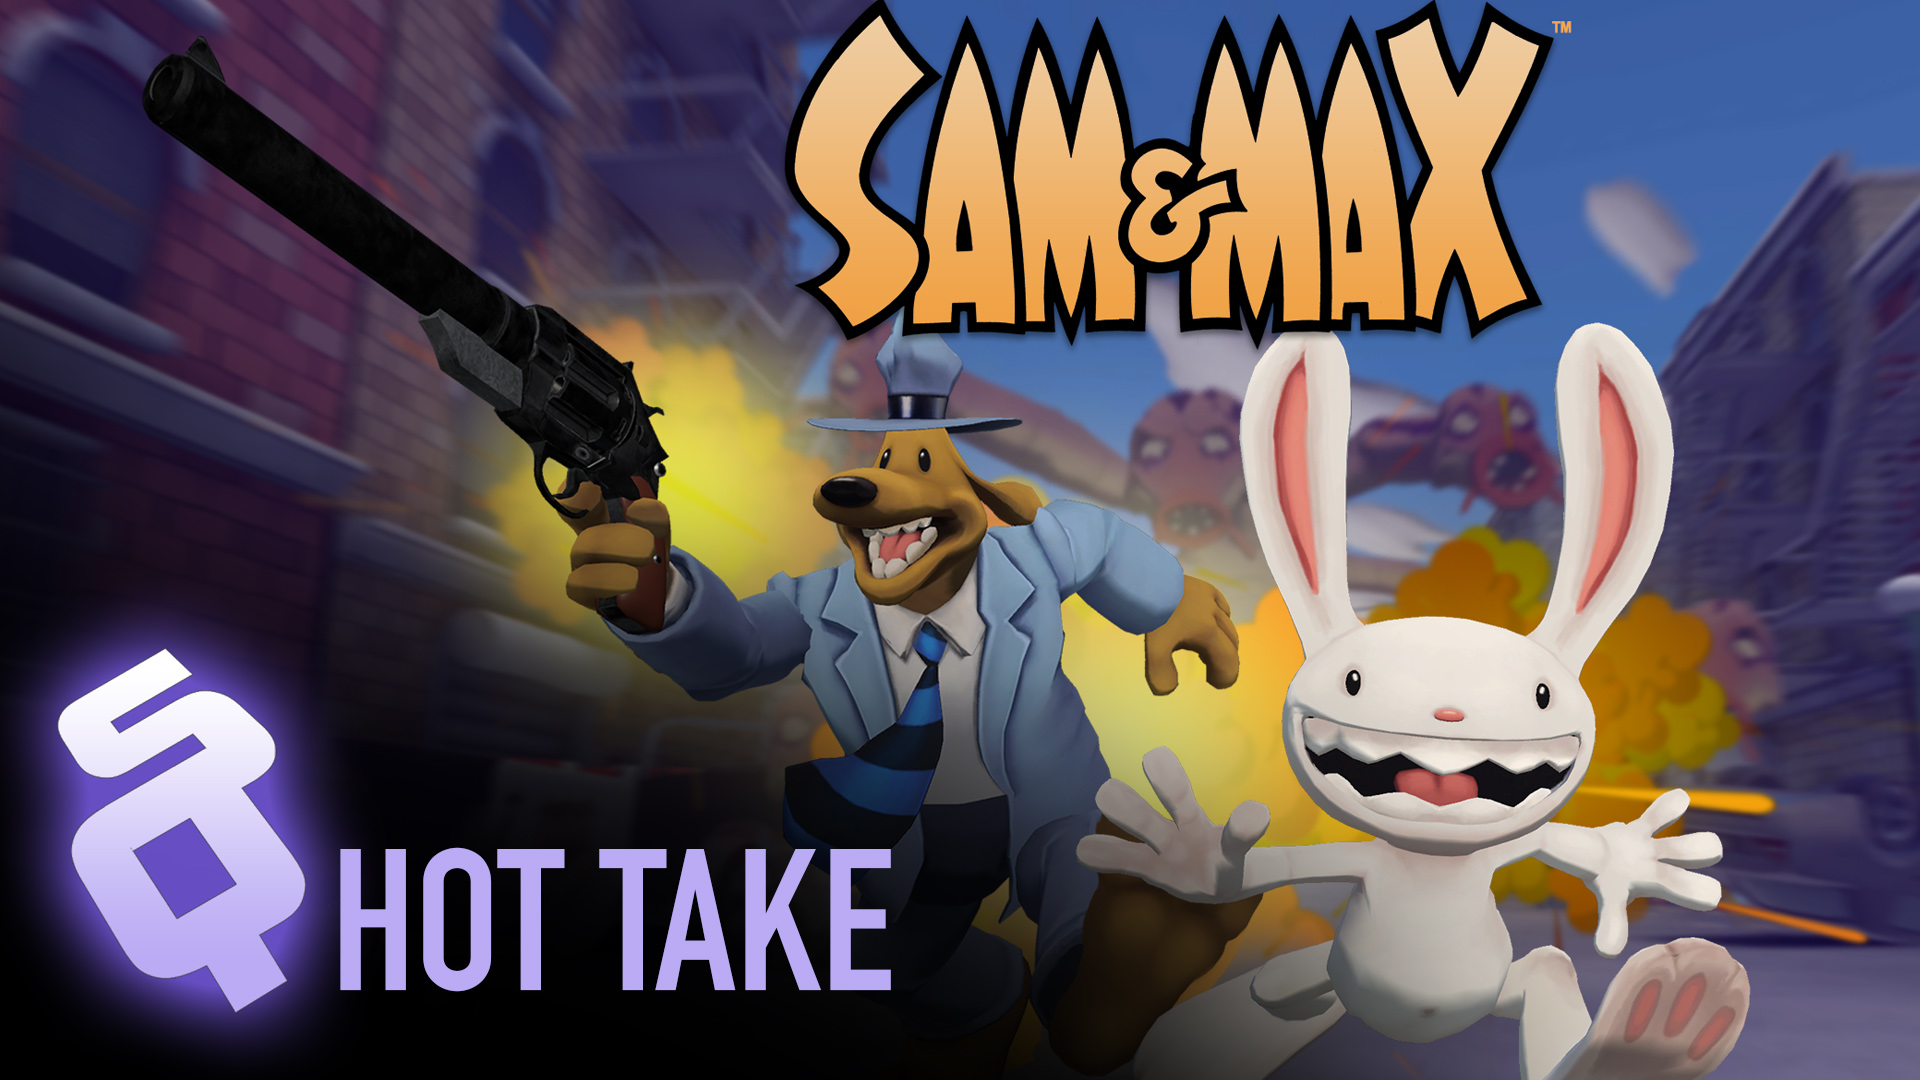 Review: Sam & Max – This Time It’s Virtual!